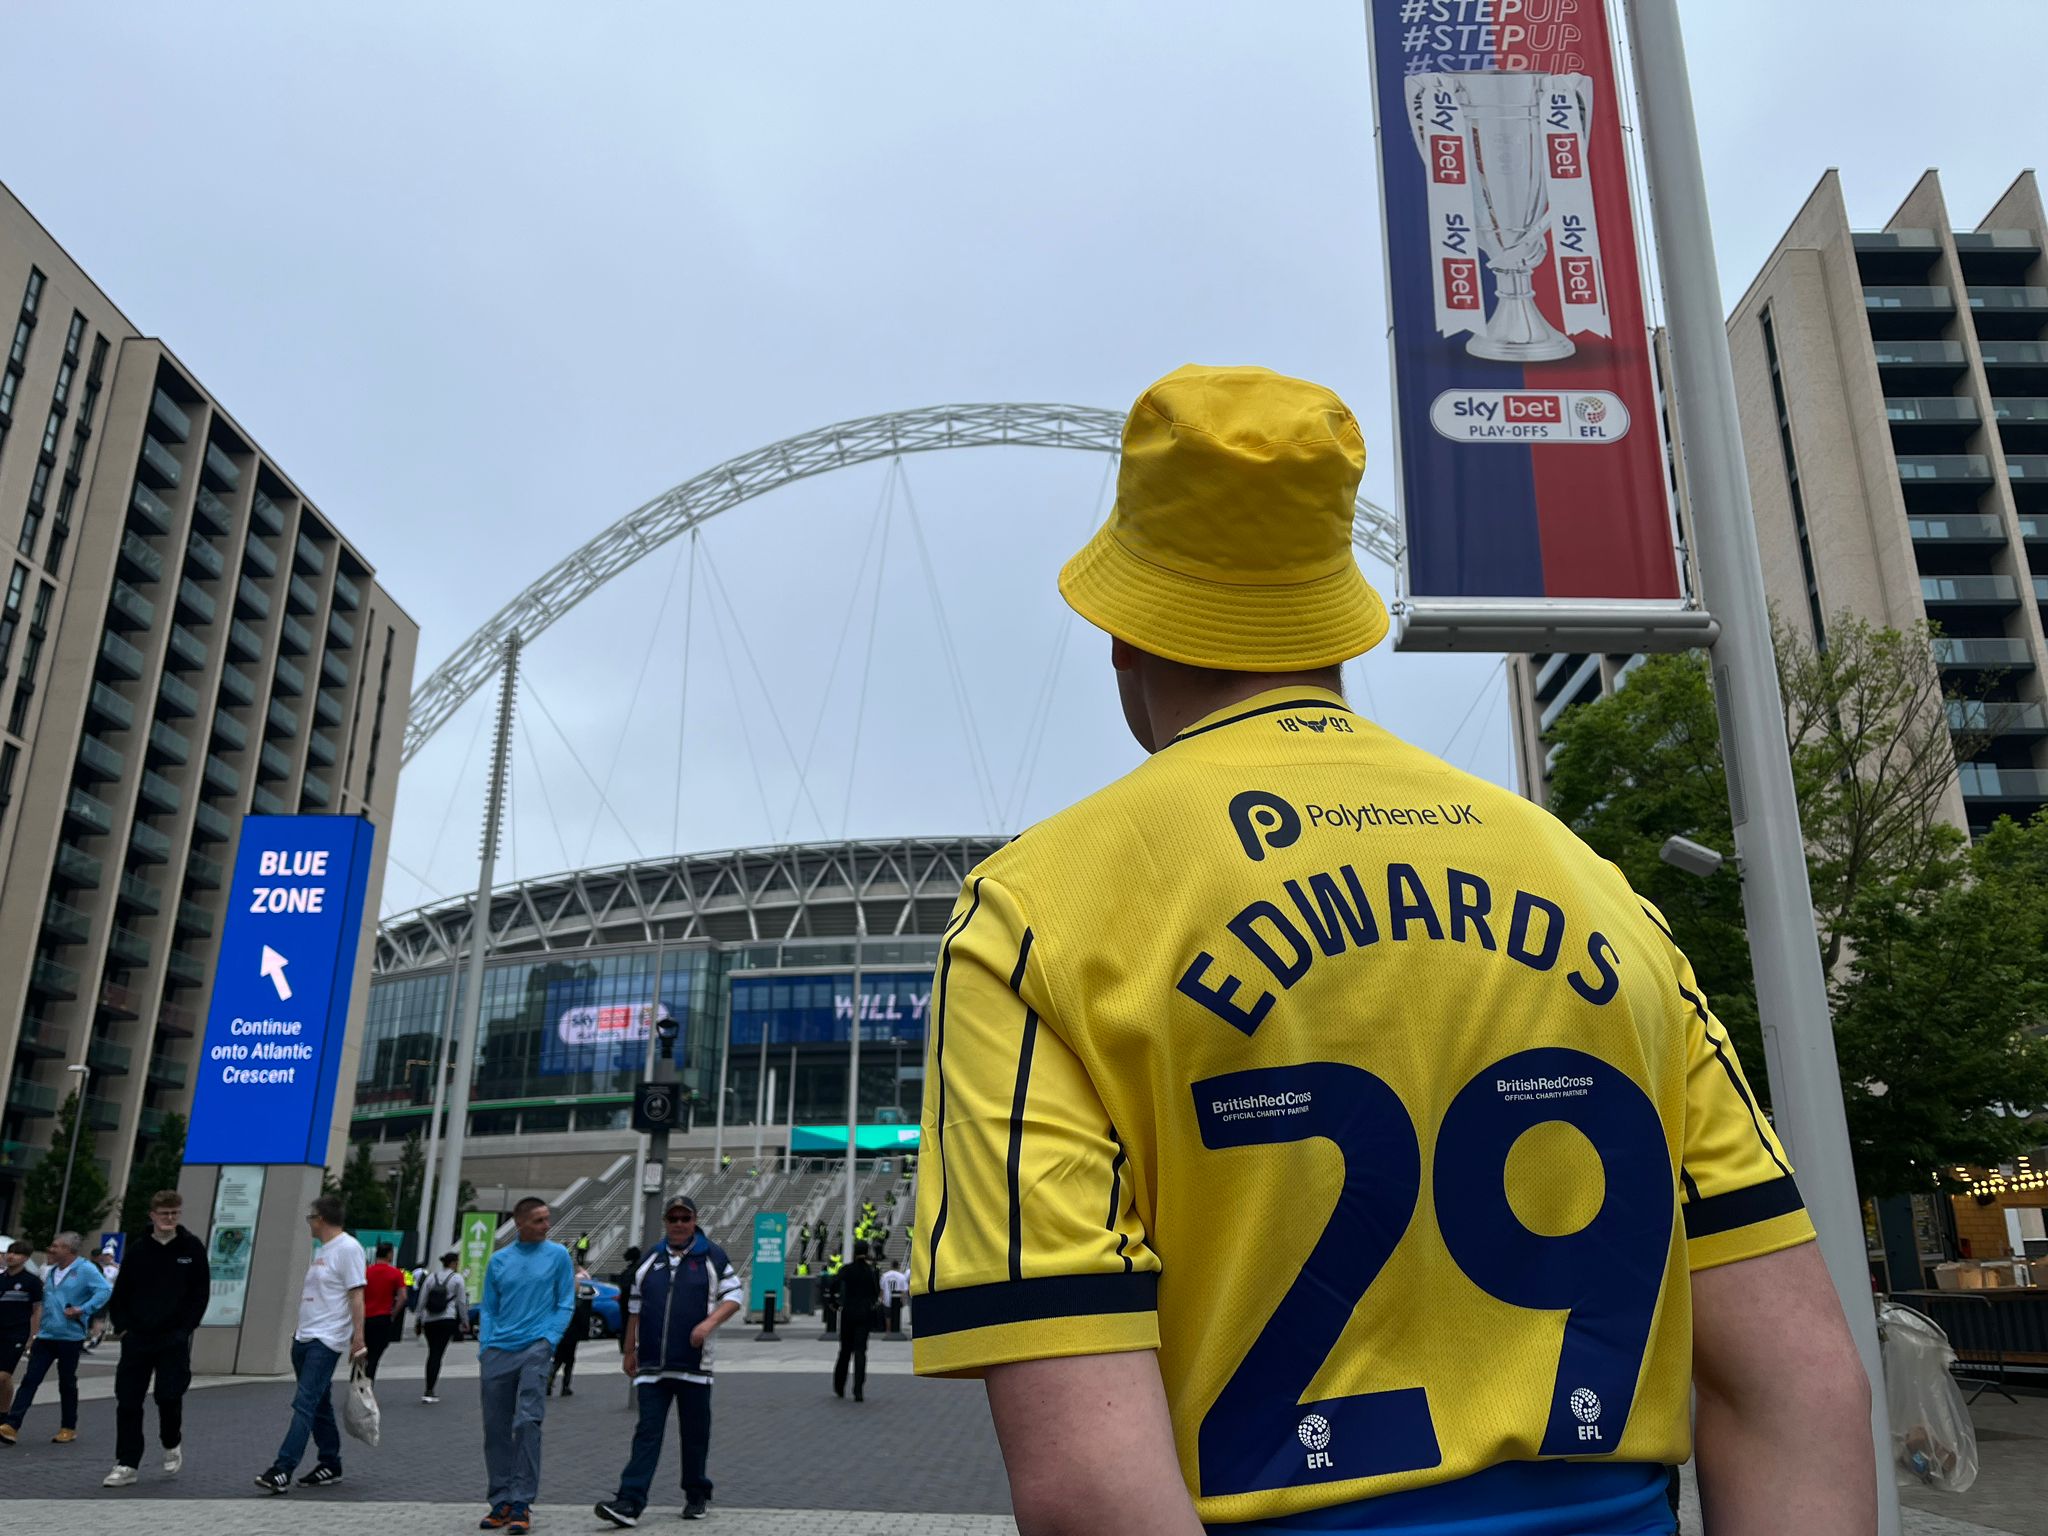 Oxford United fans at Wembley Stadium for League One Play-Off Final